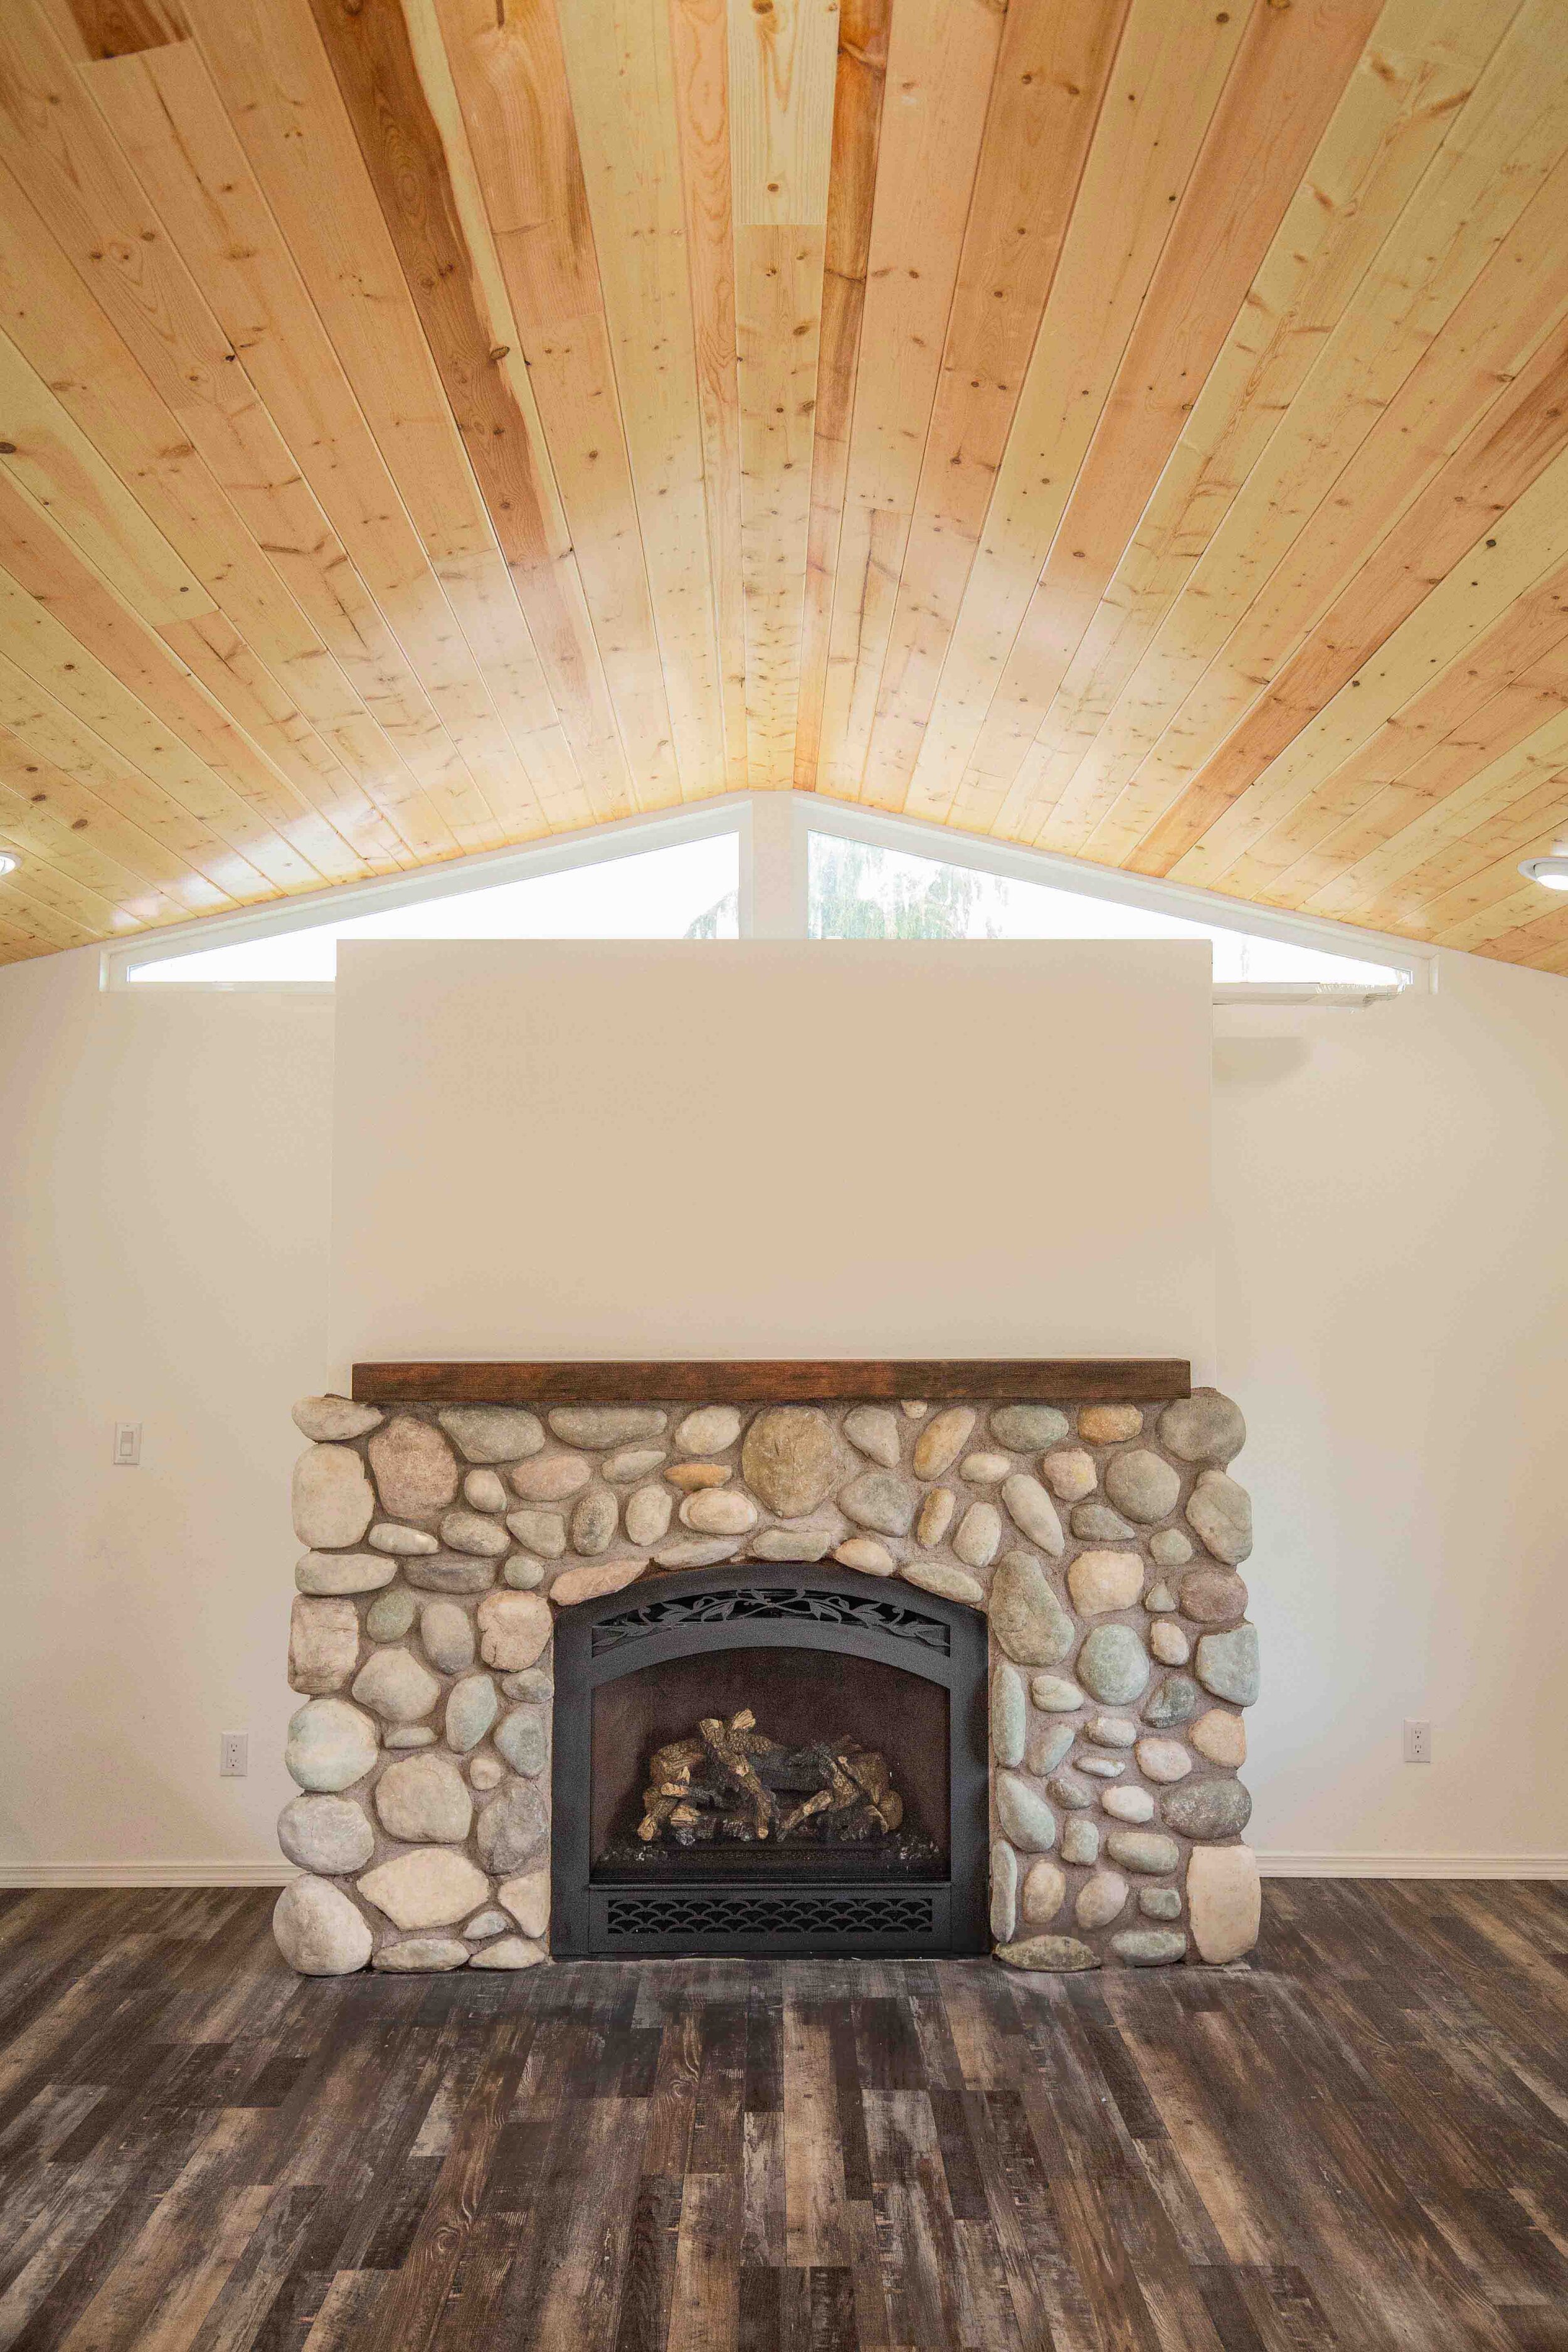 A new fireplace was curated to match the cabin-style home.